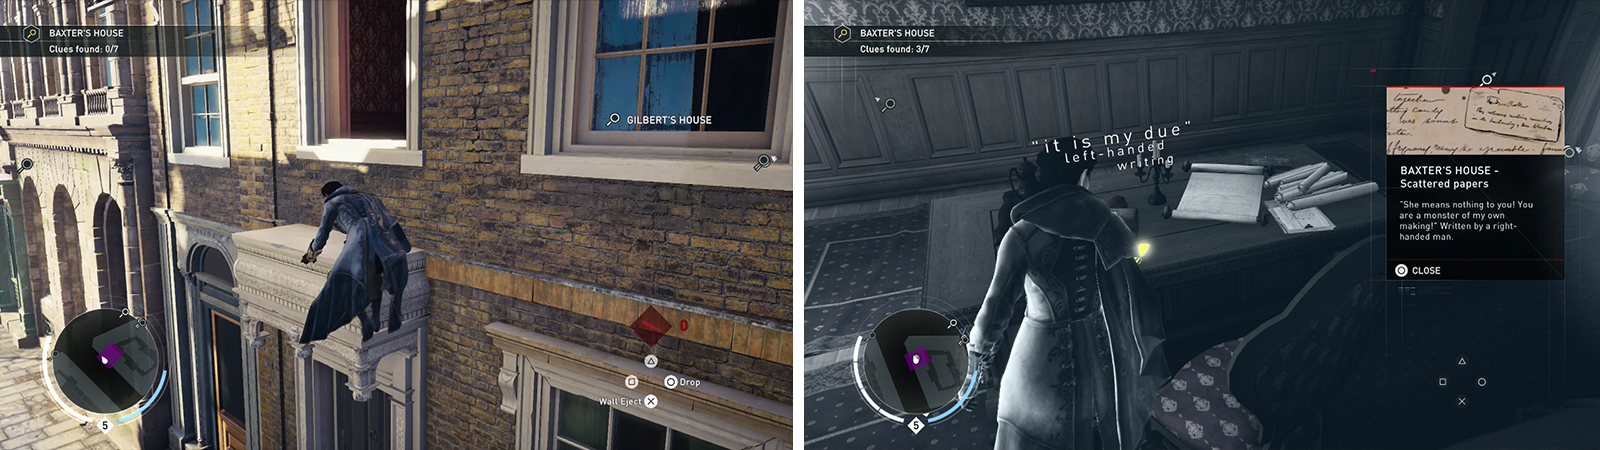 Enter Baxter's house via the window (left). Loot the clues within (right).